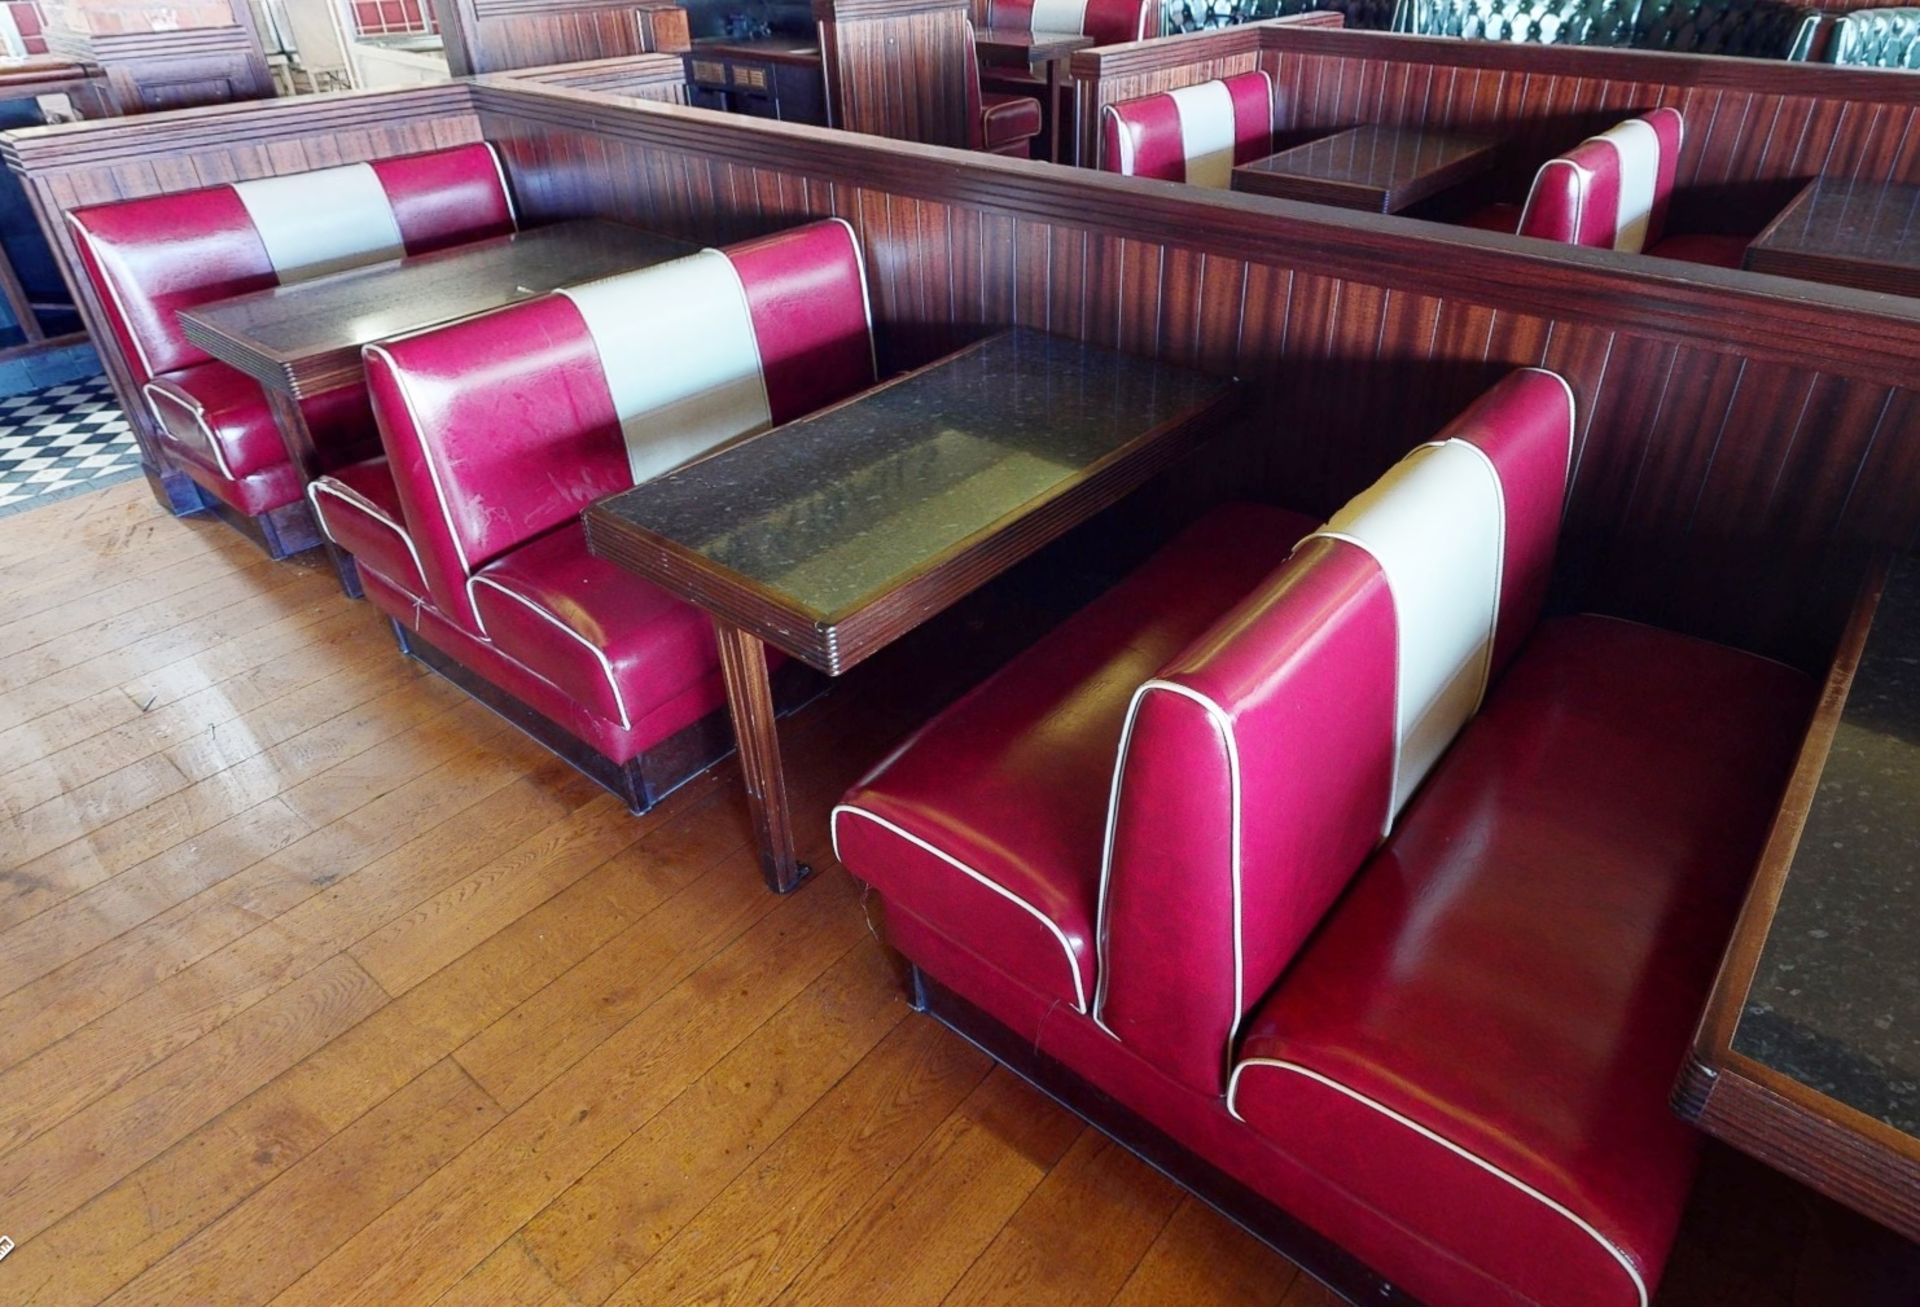 1 x Assorted Lot of Restaurant Seating Benches - Seats 18 Persons - American Diner Style in Red - Image 9 of 11